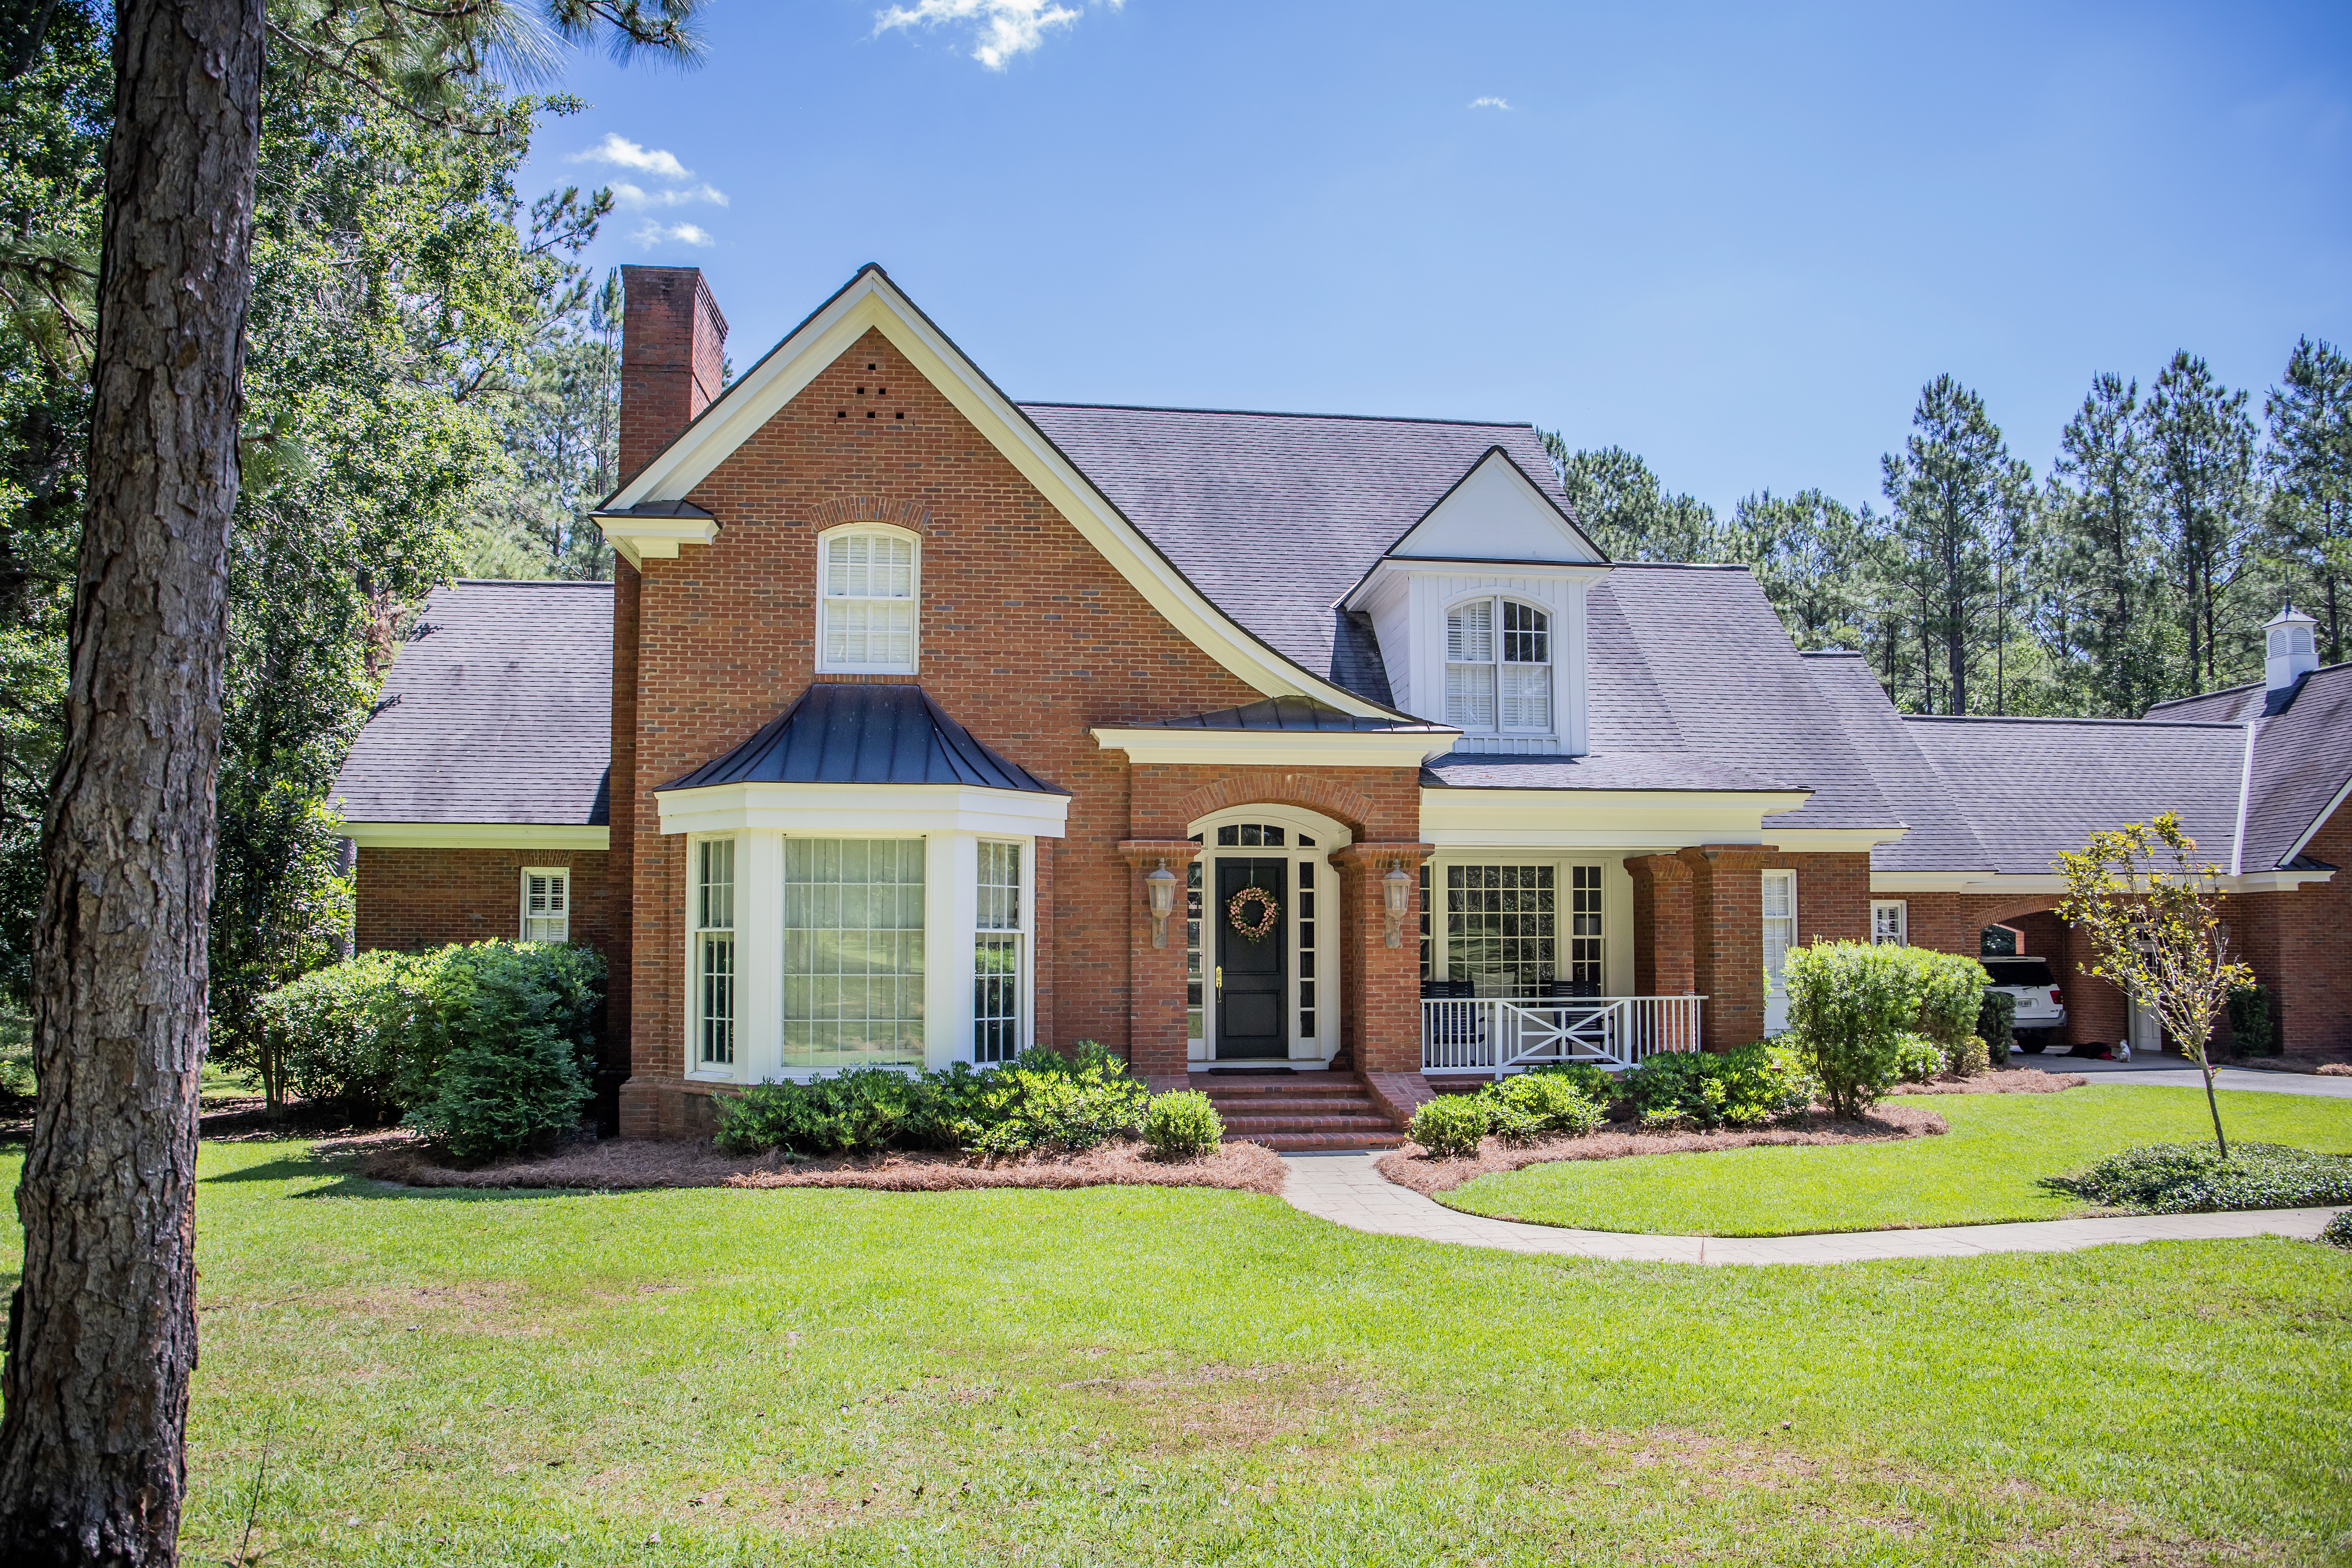 A solid brick Colonial-style home